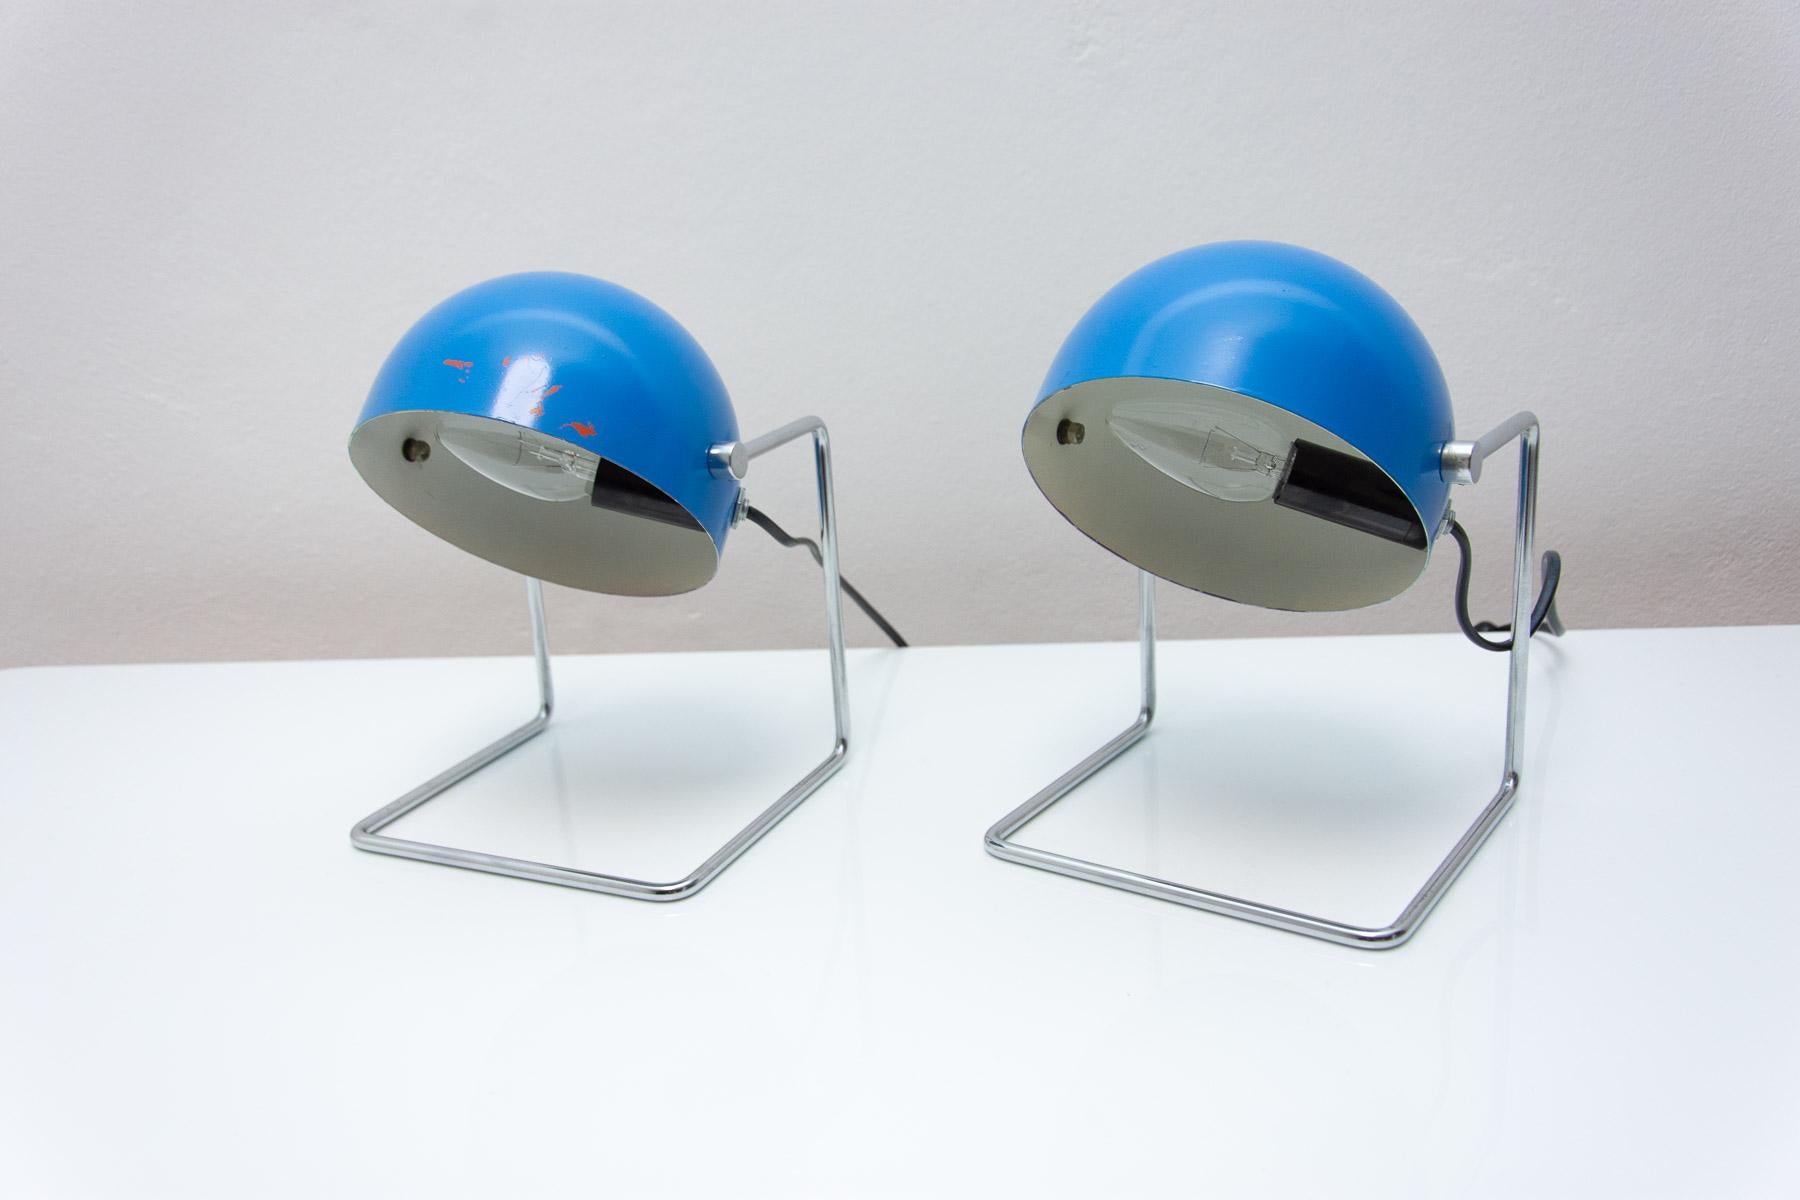  Pair of Midcentury Space-Age Positioning Desk Lamps, 1960s In Good Condition In Prague 8, CZ